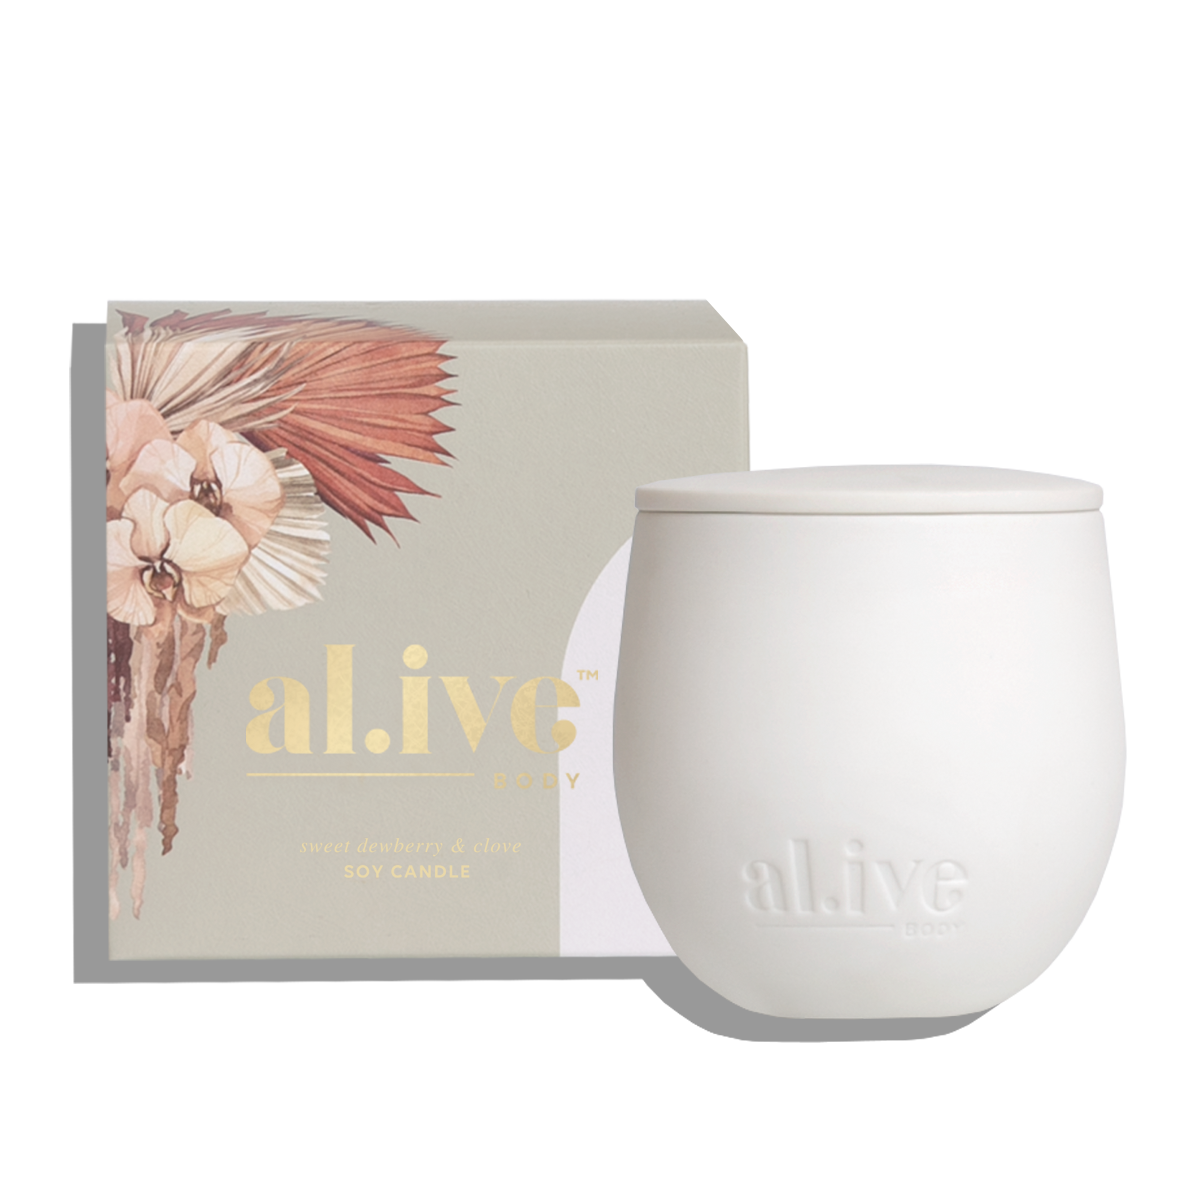 Alive Sweet Dewberry & Clove Soy Candle - White 295g